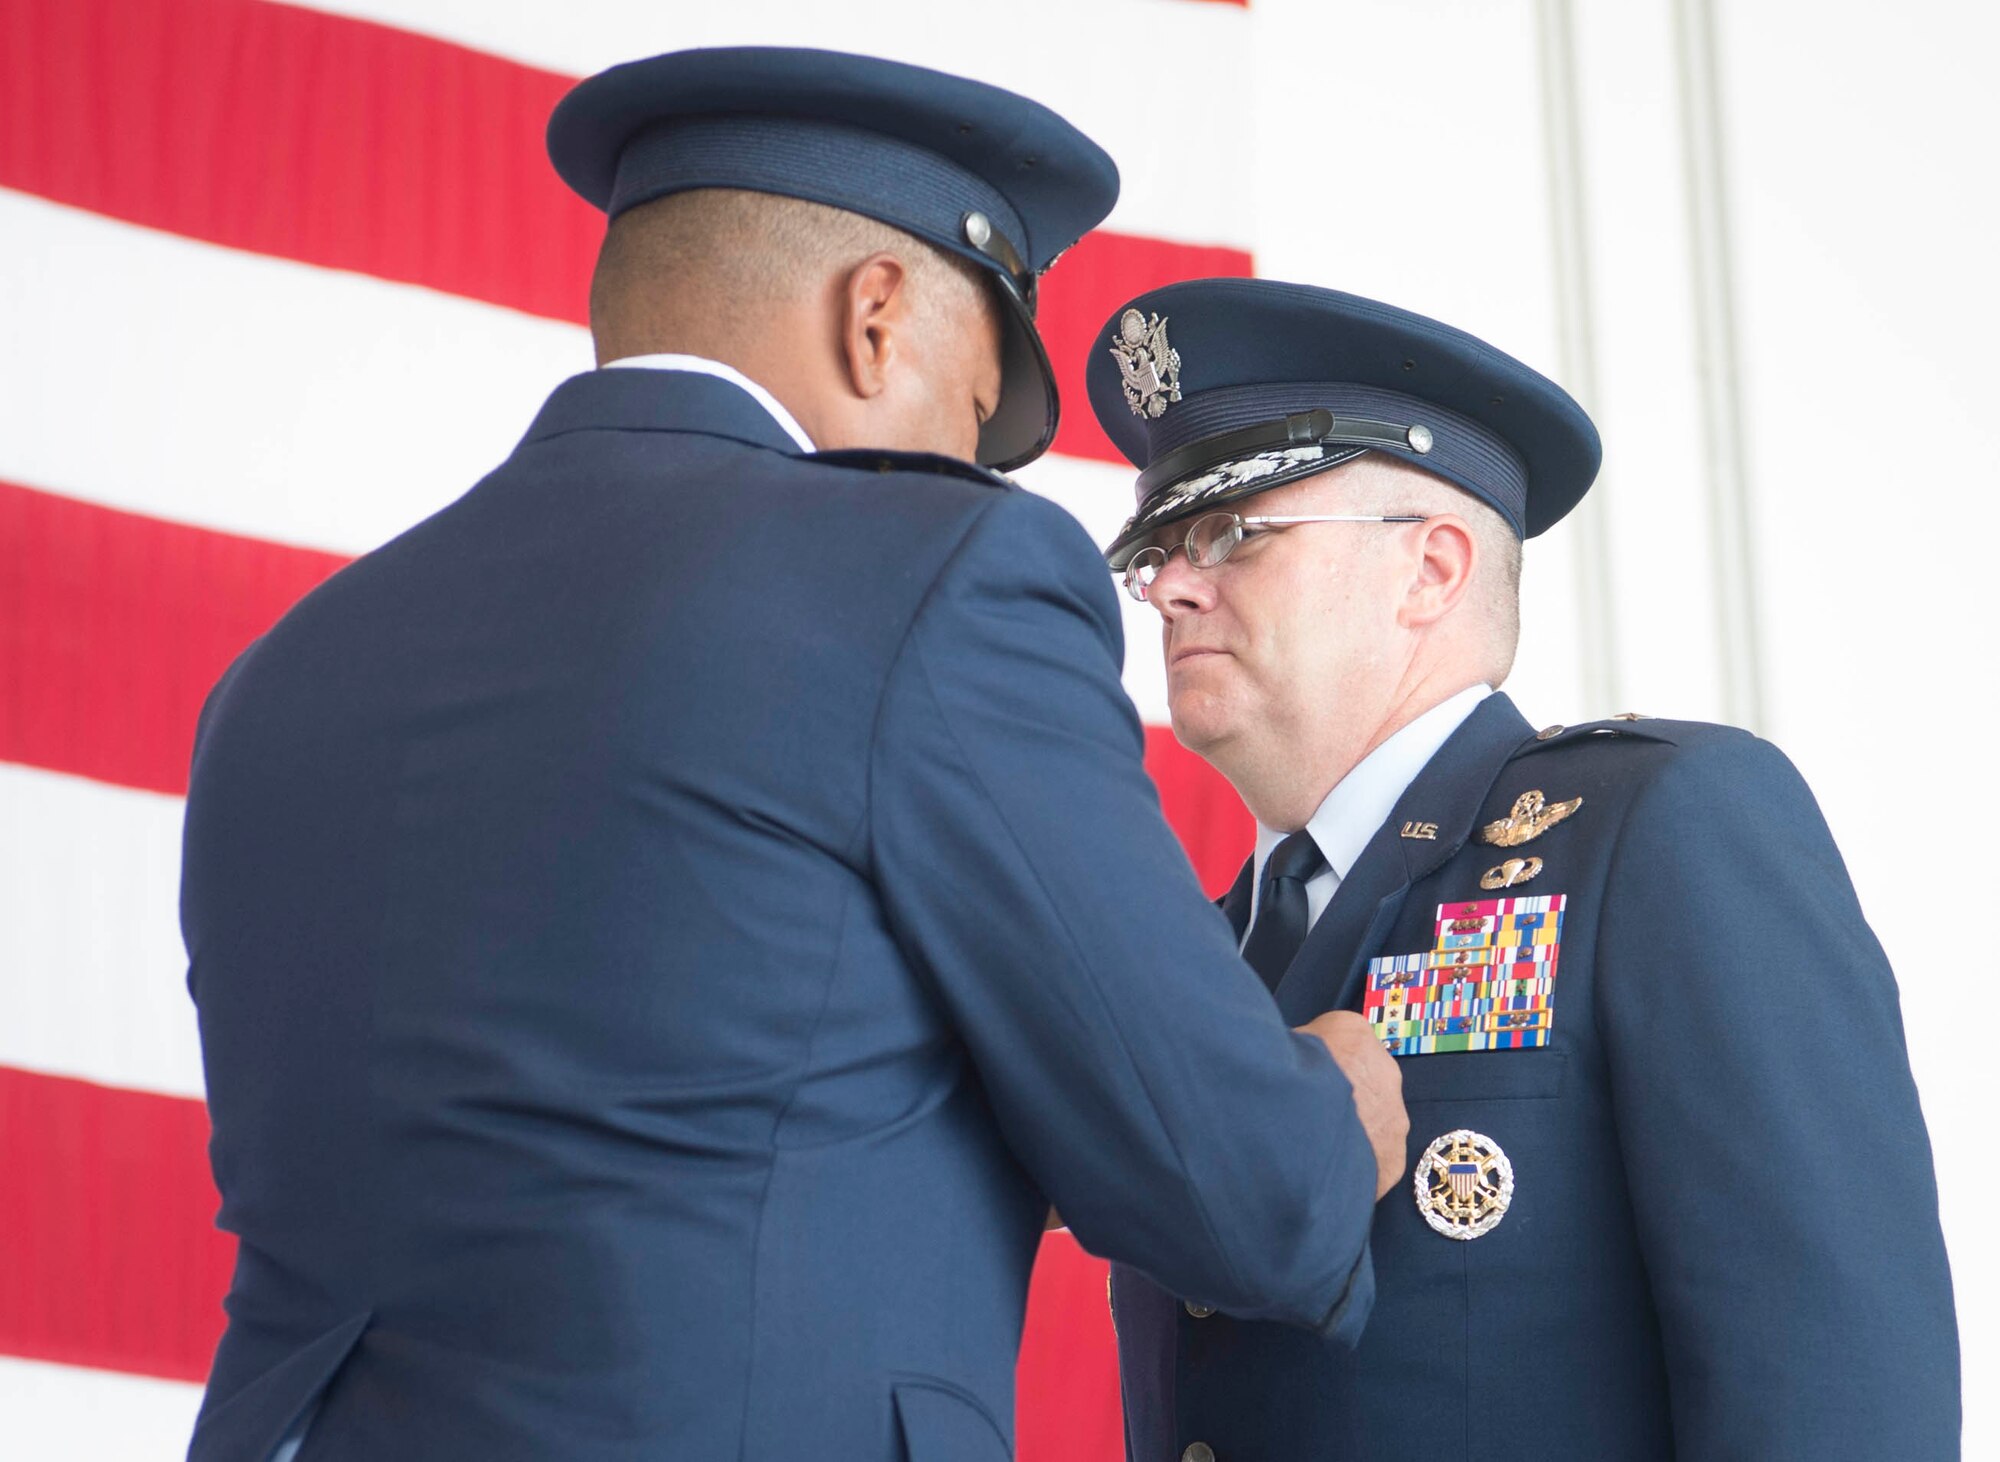 The men and women of the 86th Airlift Wing welcomed their new commander, Brig. Gen. Mark R. August, Aug. 9, 2018.